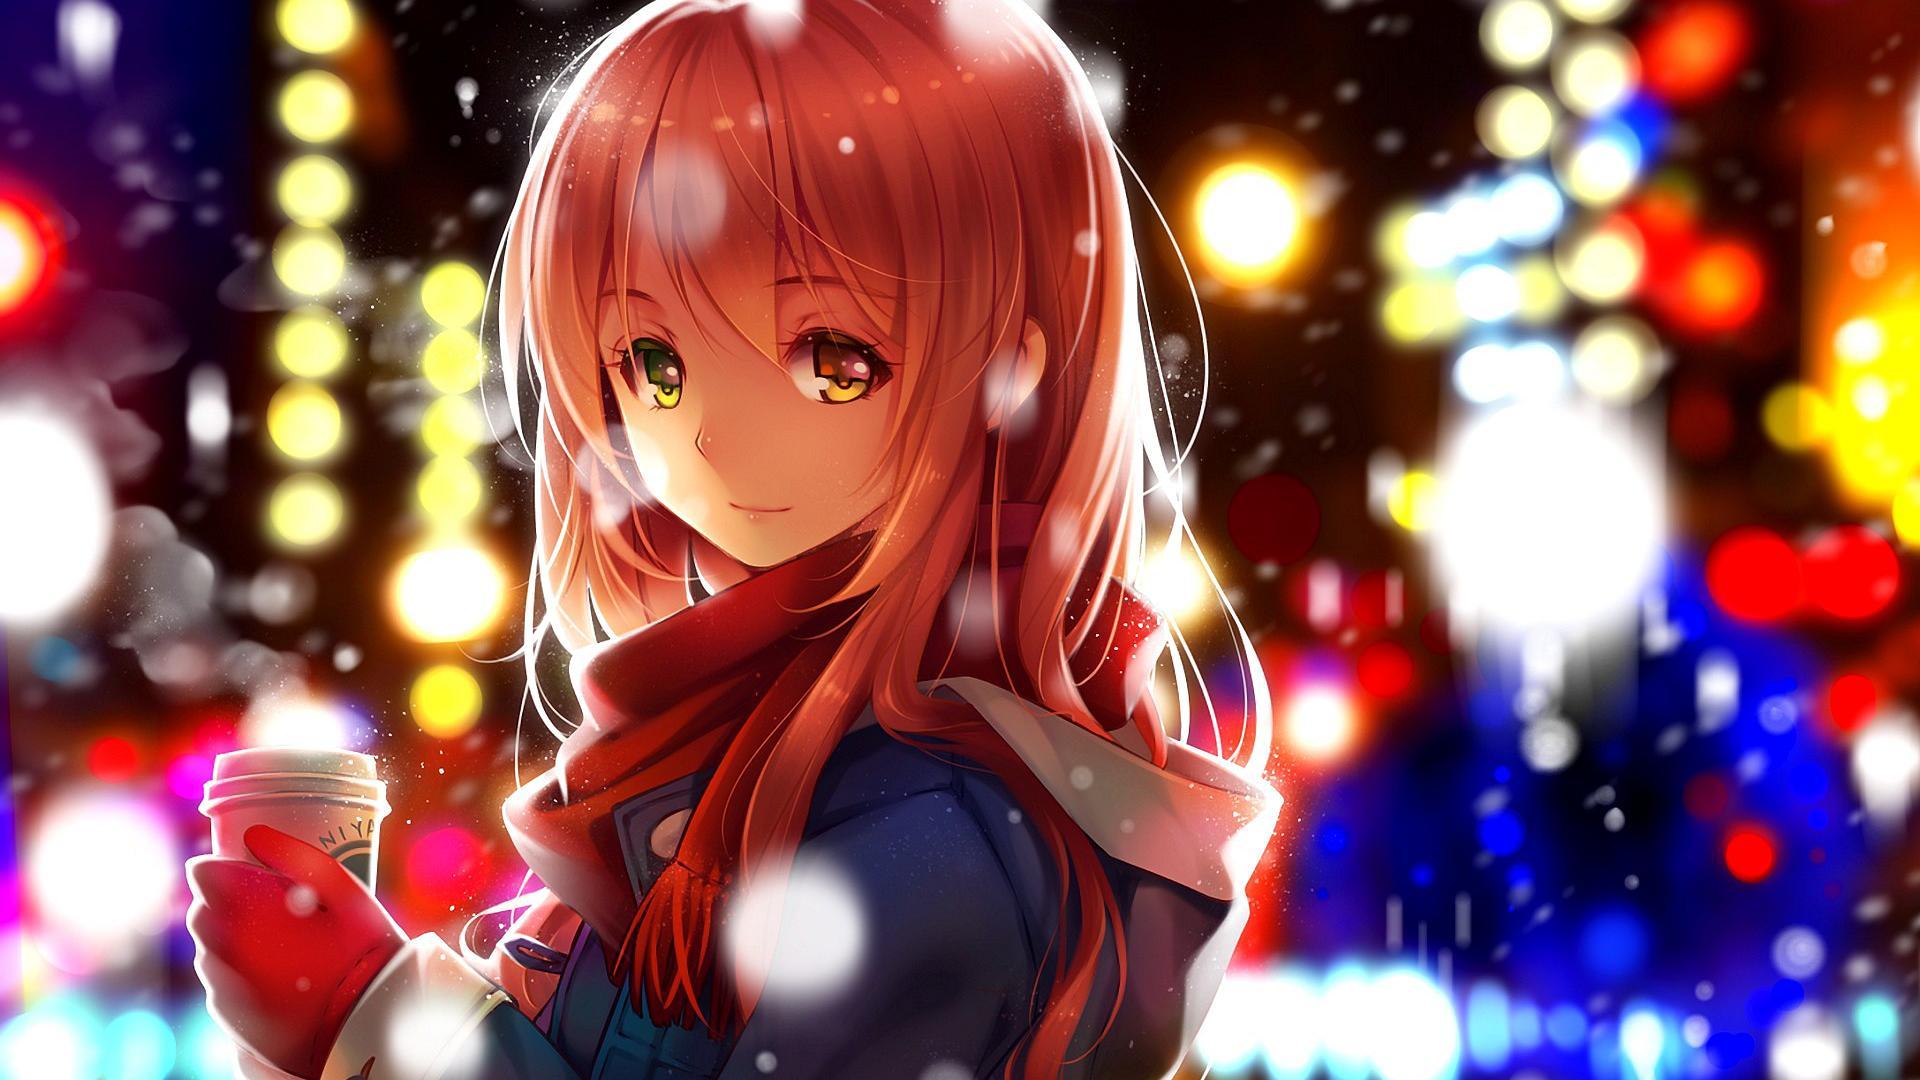 My Collection Of Christmas Winter Anime Background (x Post From R Animewallpaper)